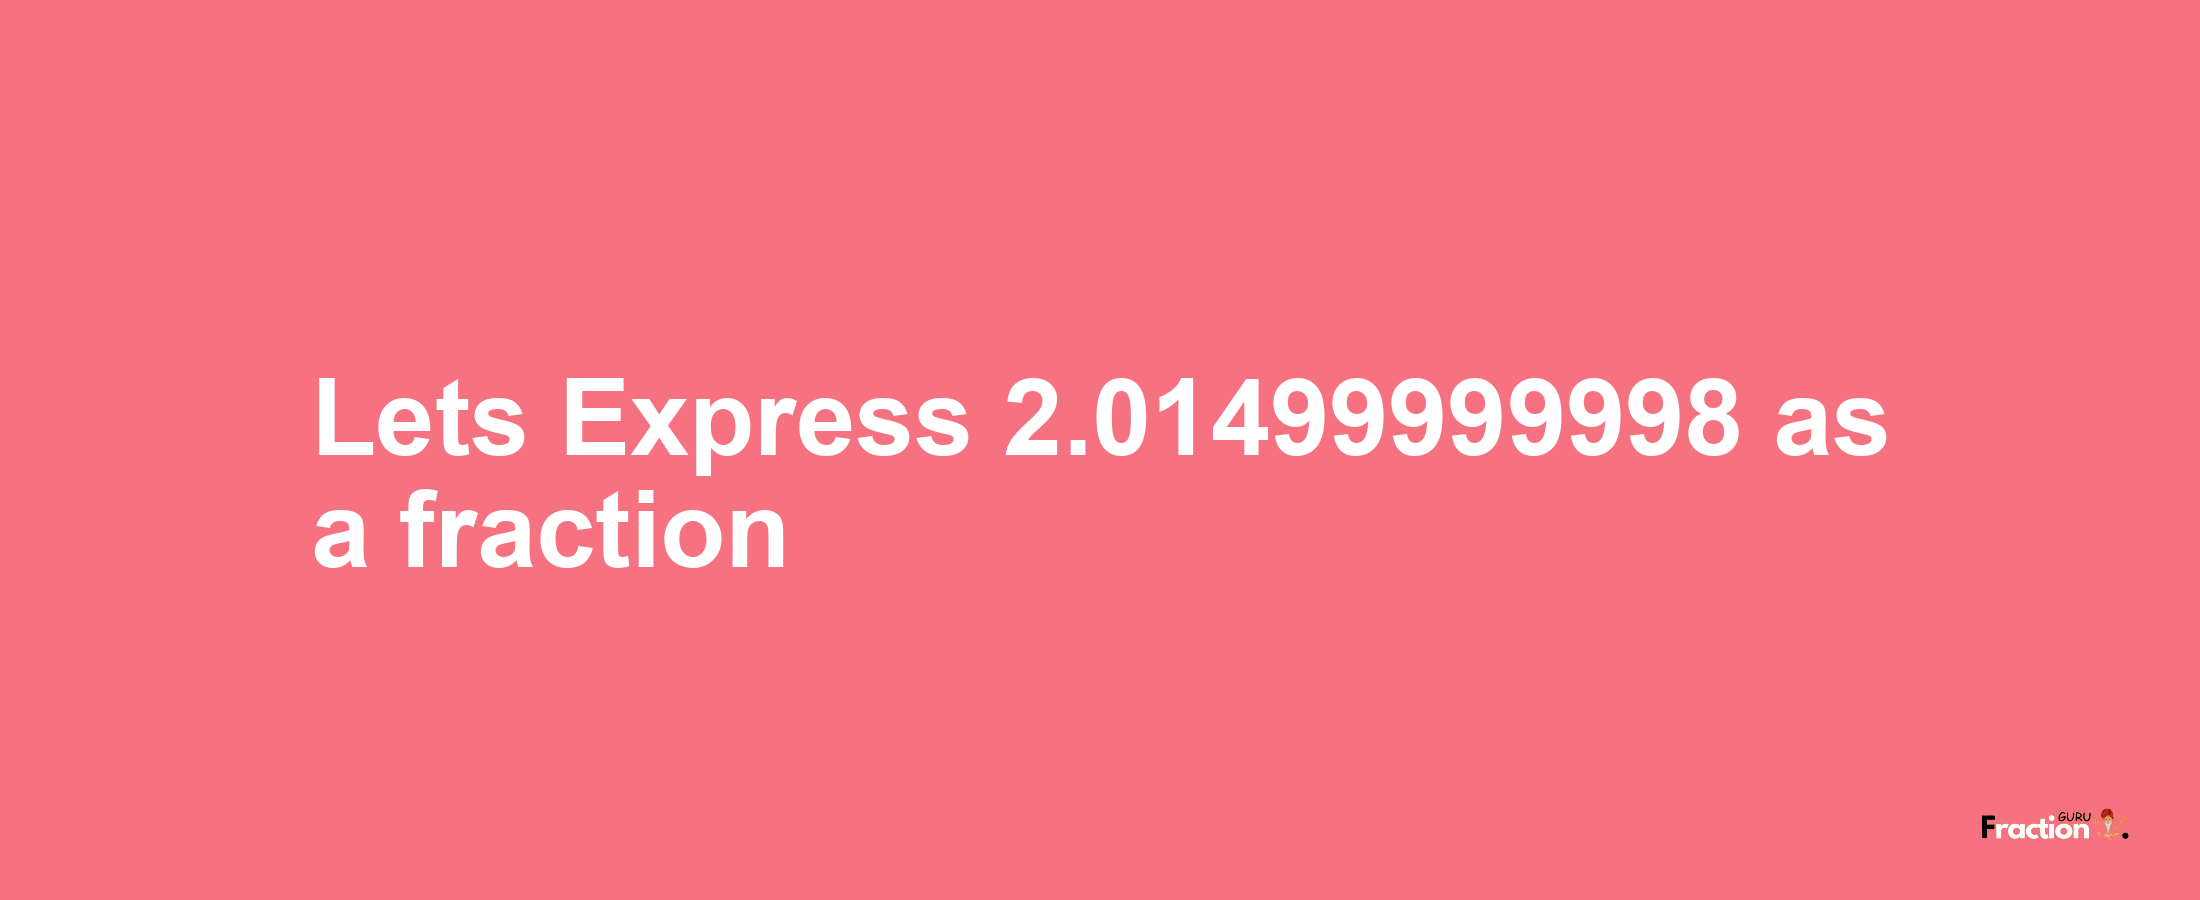 Lets Express 2.01499999998 as afraction